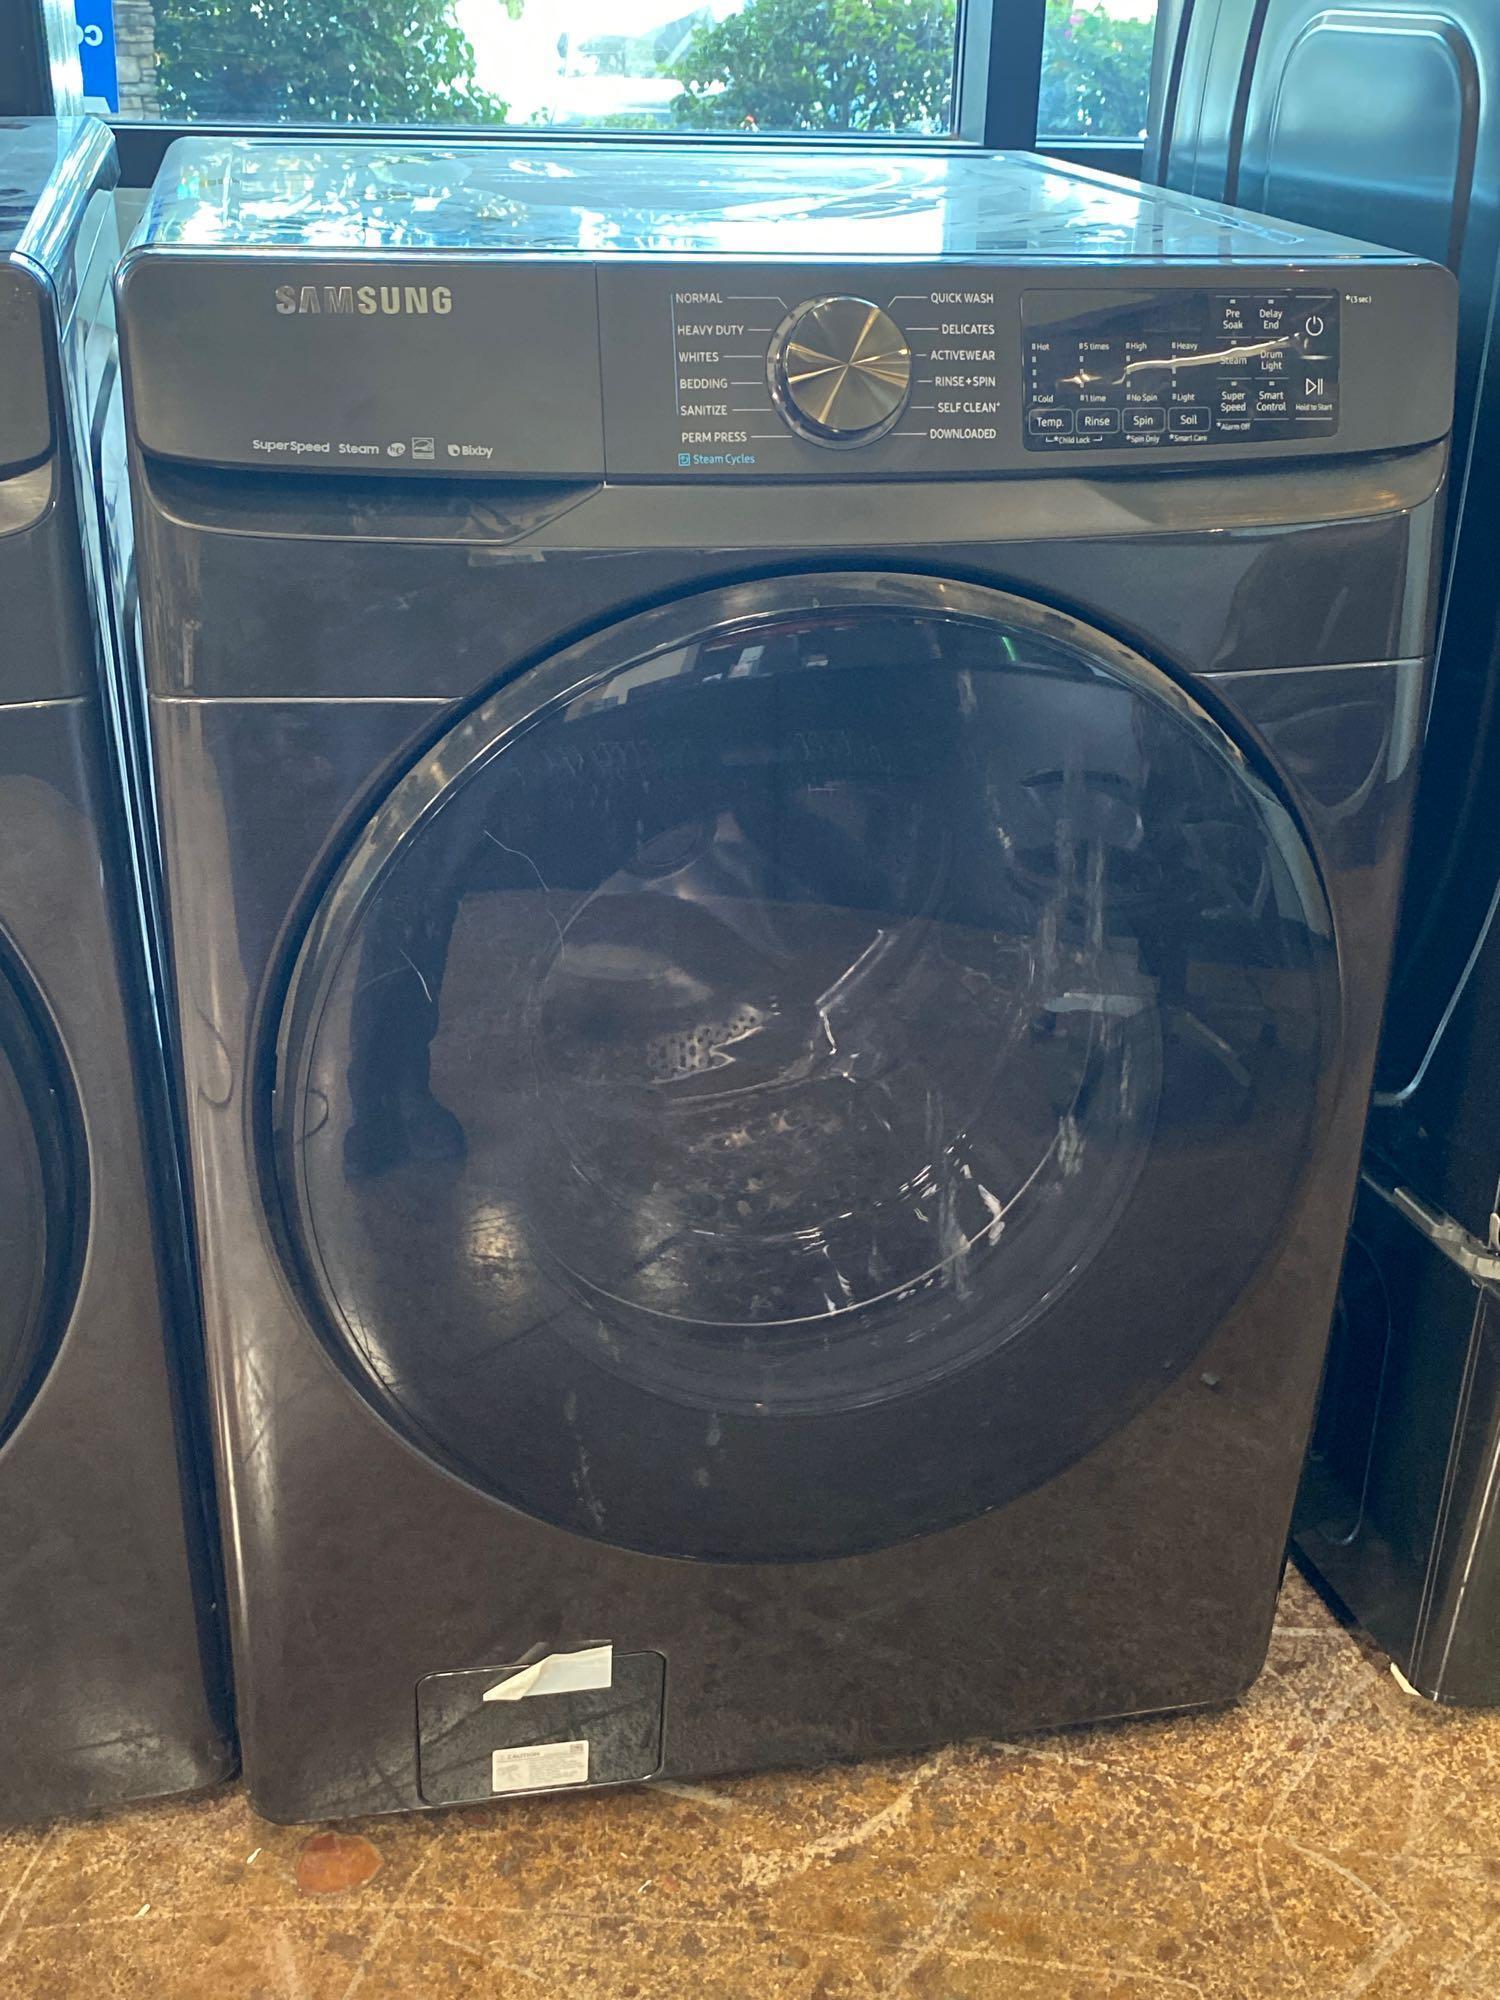 Samsung 5.0 cu. ft. Washer and 7.5 cu. ft. Smart Electric Dryer Pair*WASHER PREVIOUSLY INSTALLED*